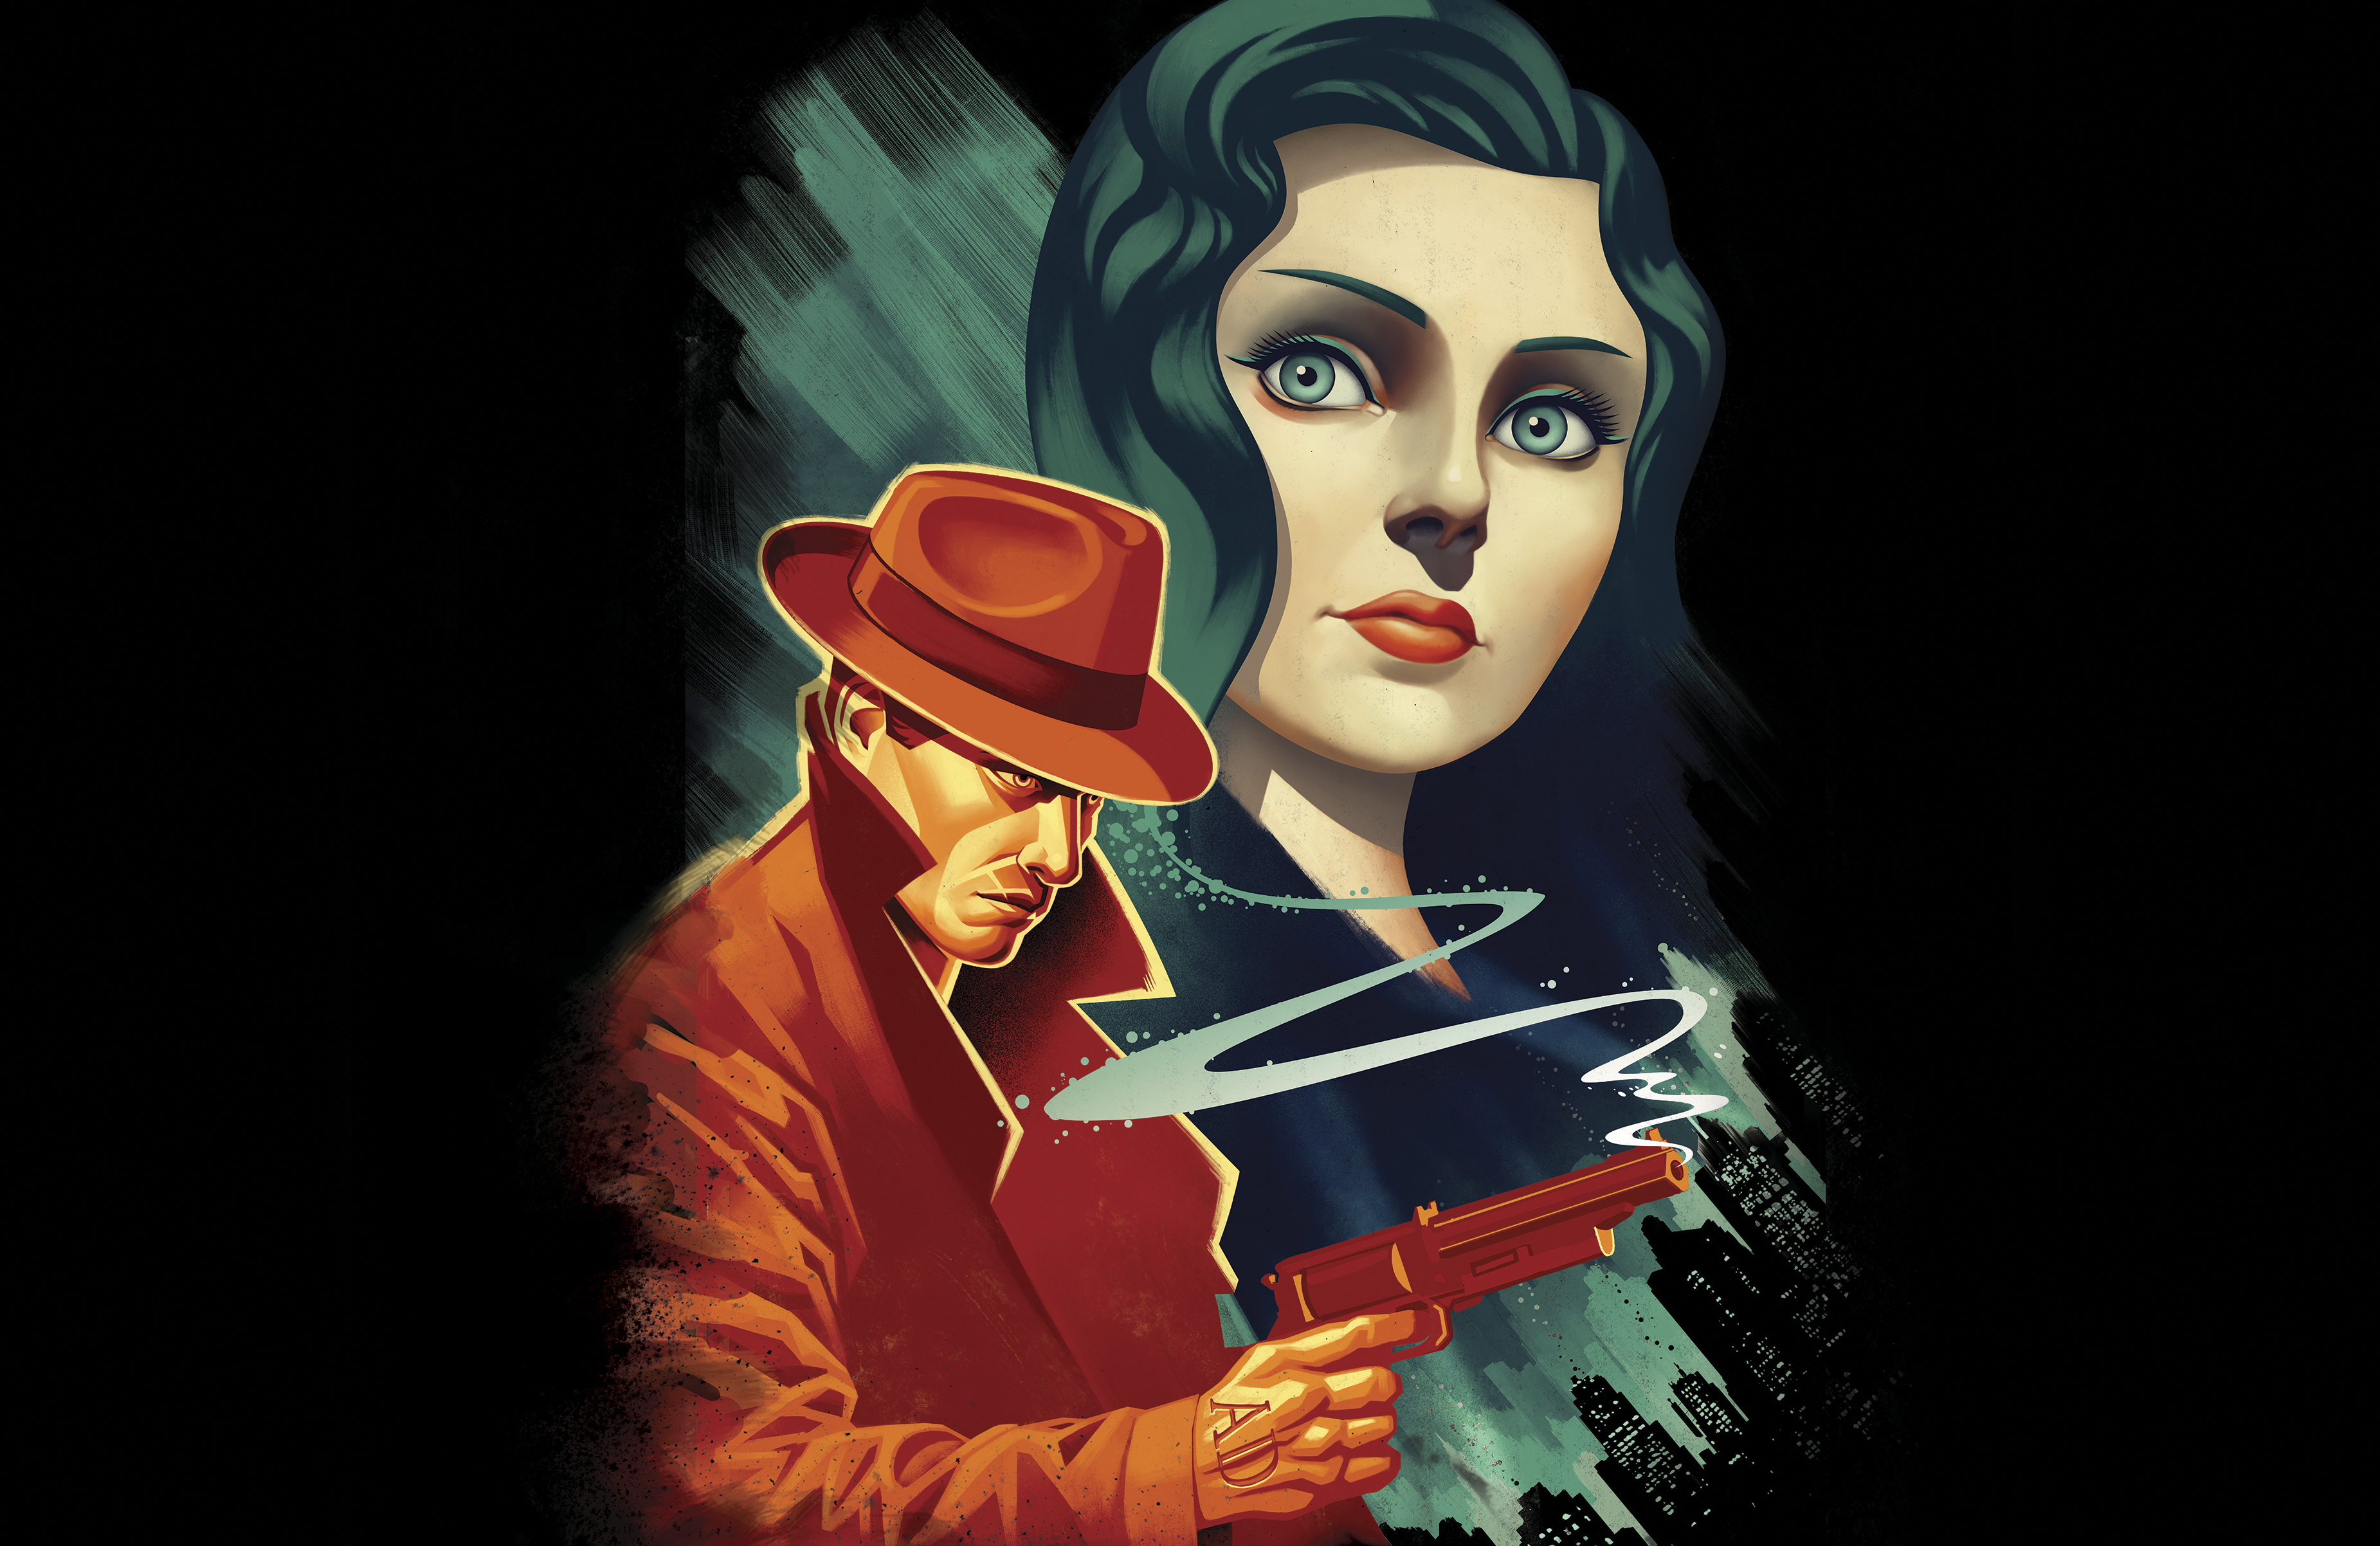 BioShock Infinite: Burial at Sea - Episode One PC system requirements